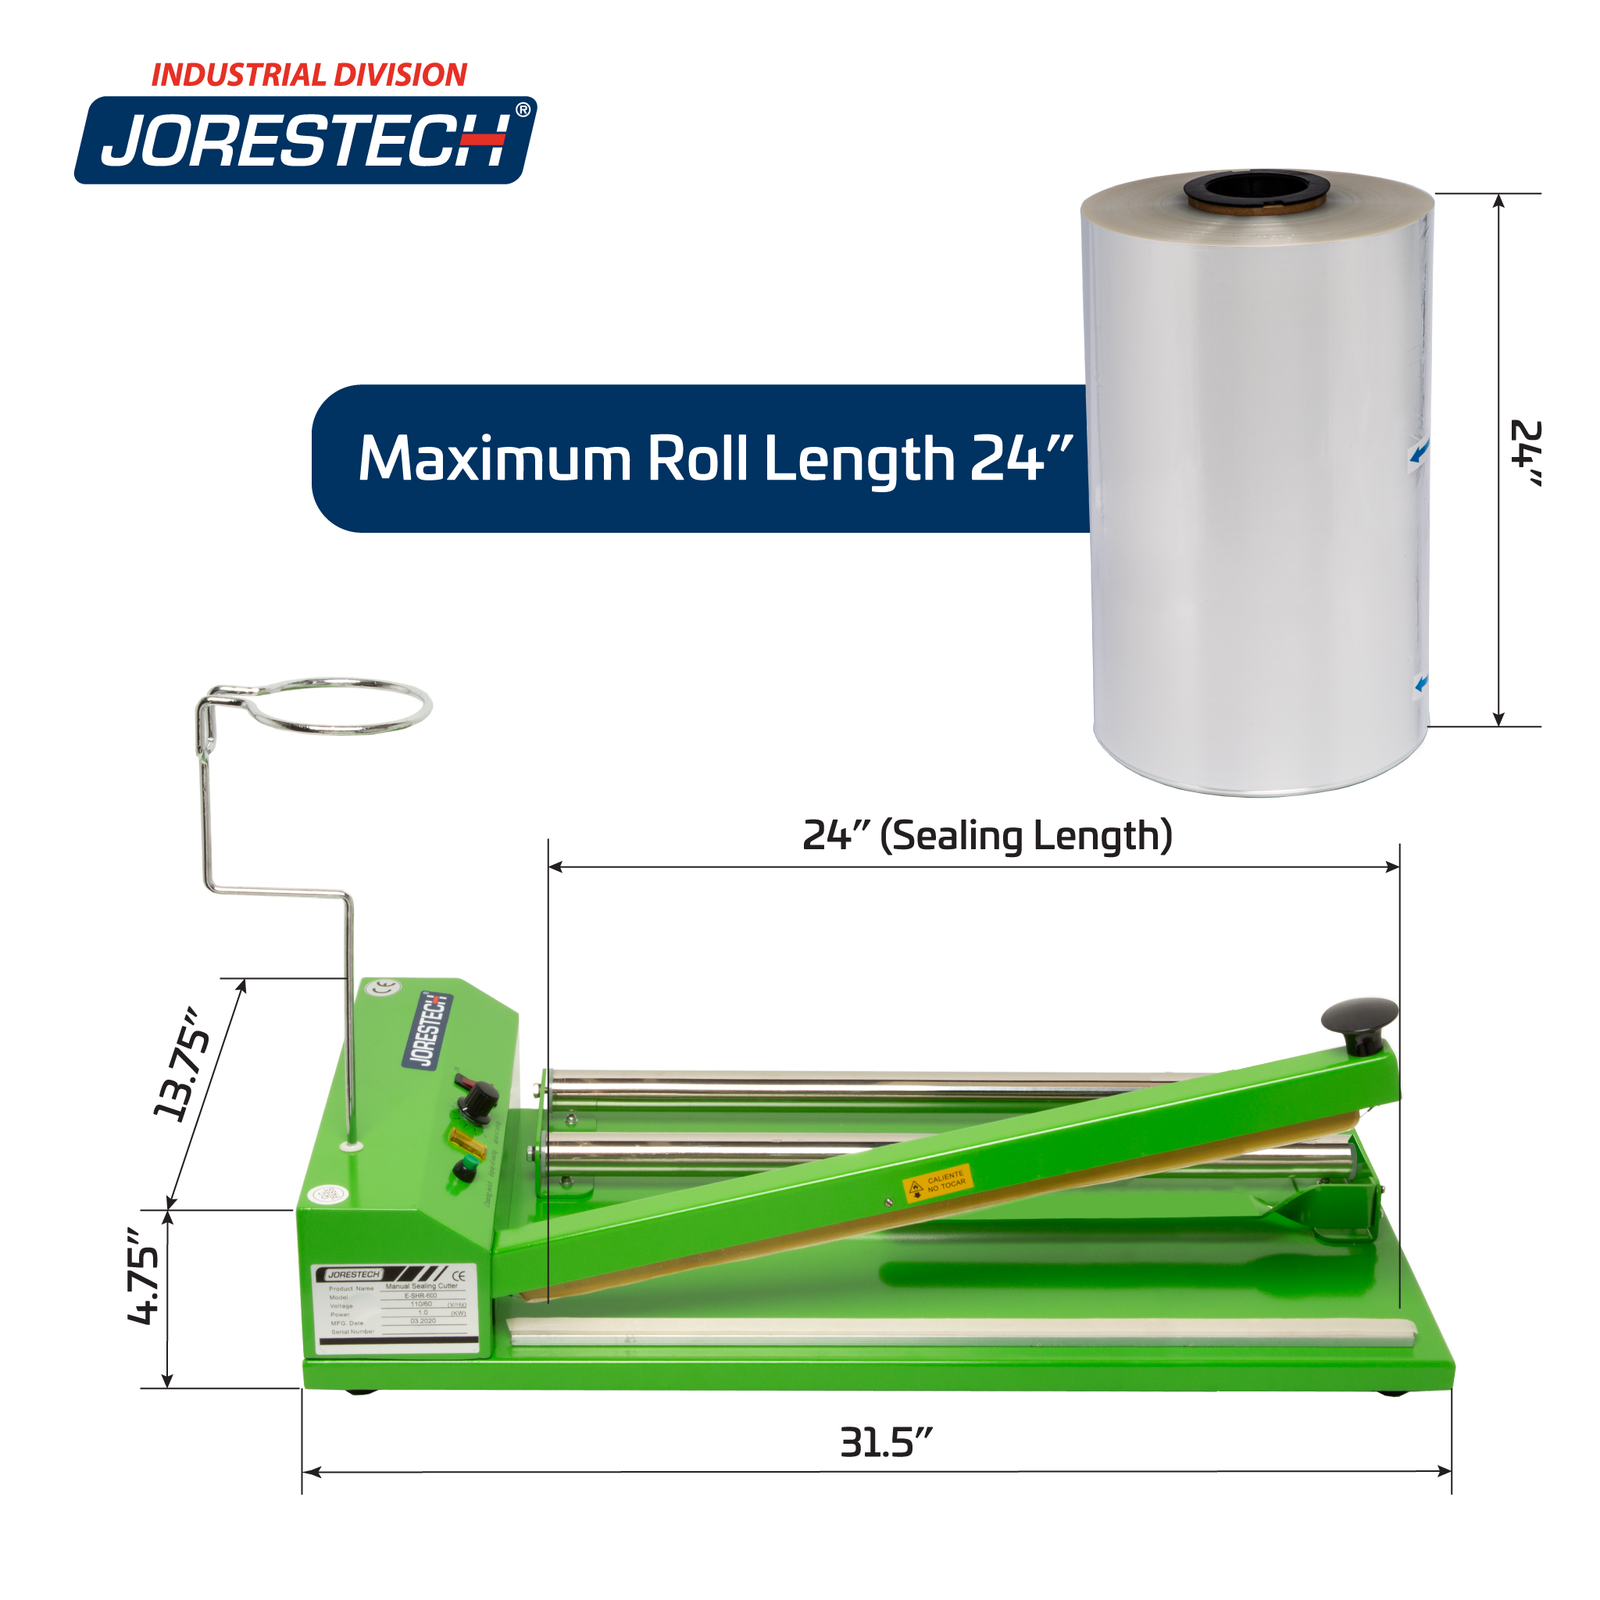 Shows a JORES TECHNOLOGIES® shrink film roll and a green, JORES TECHNOLOGIES® shrink packaging unit with their respective measurements. A blue text next to the shrink roll reads 